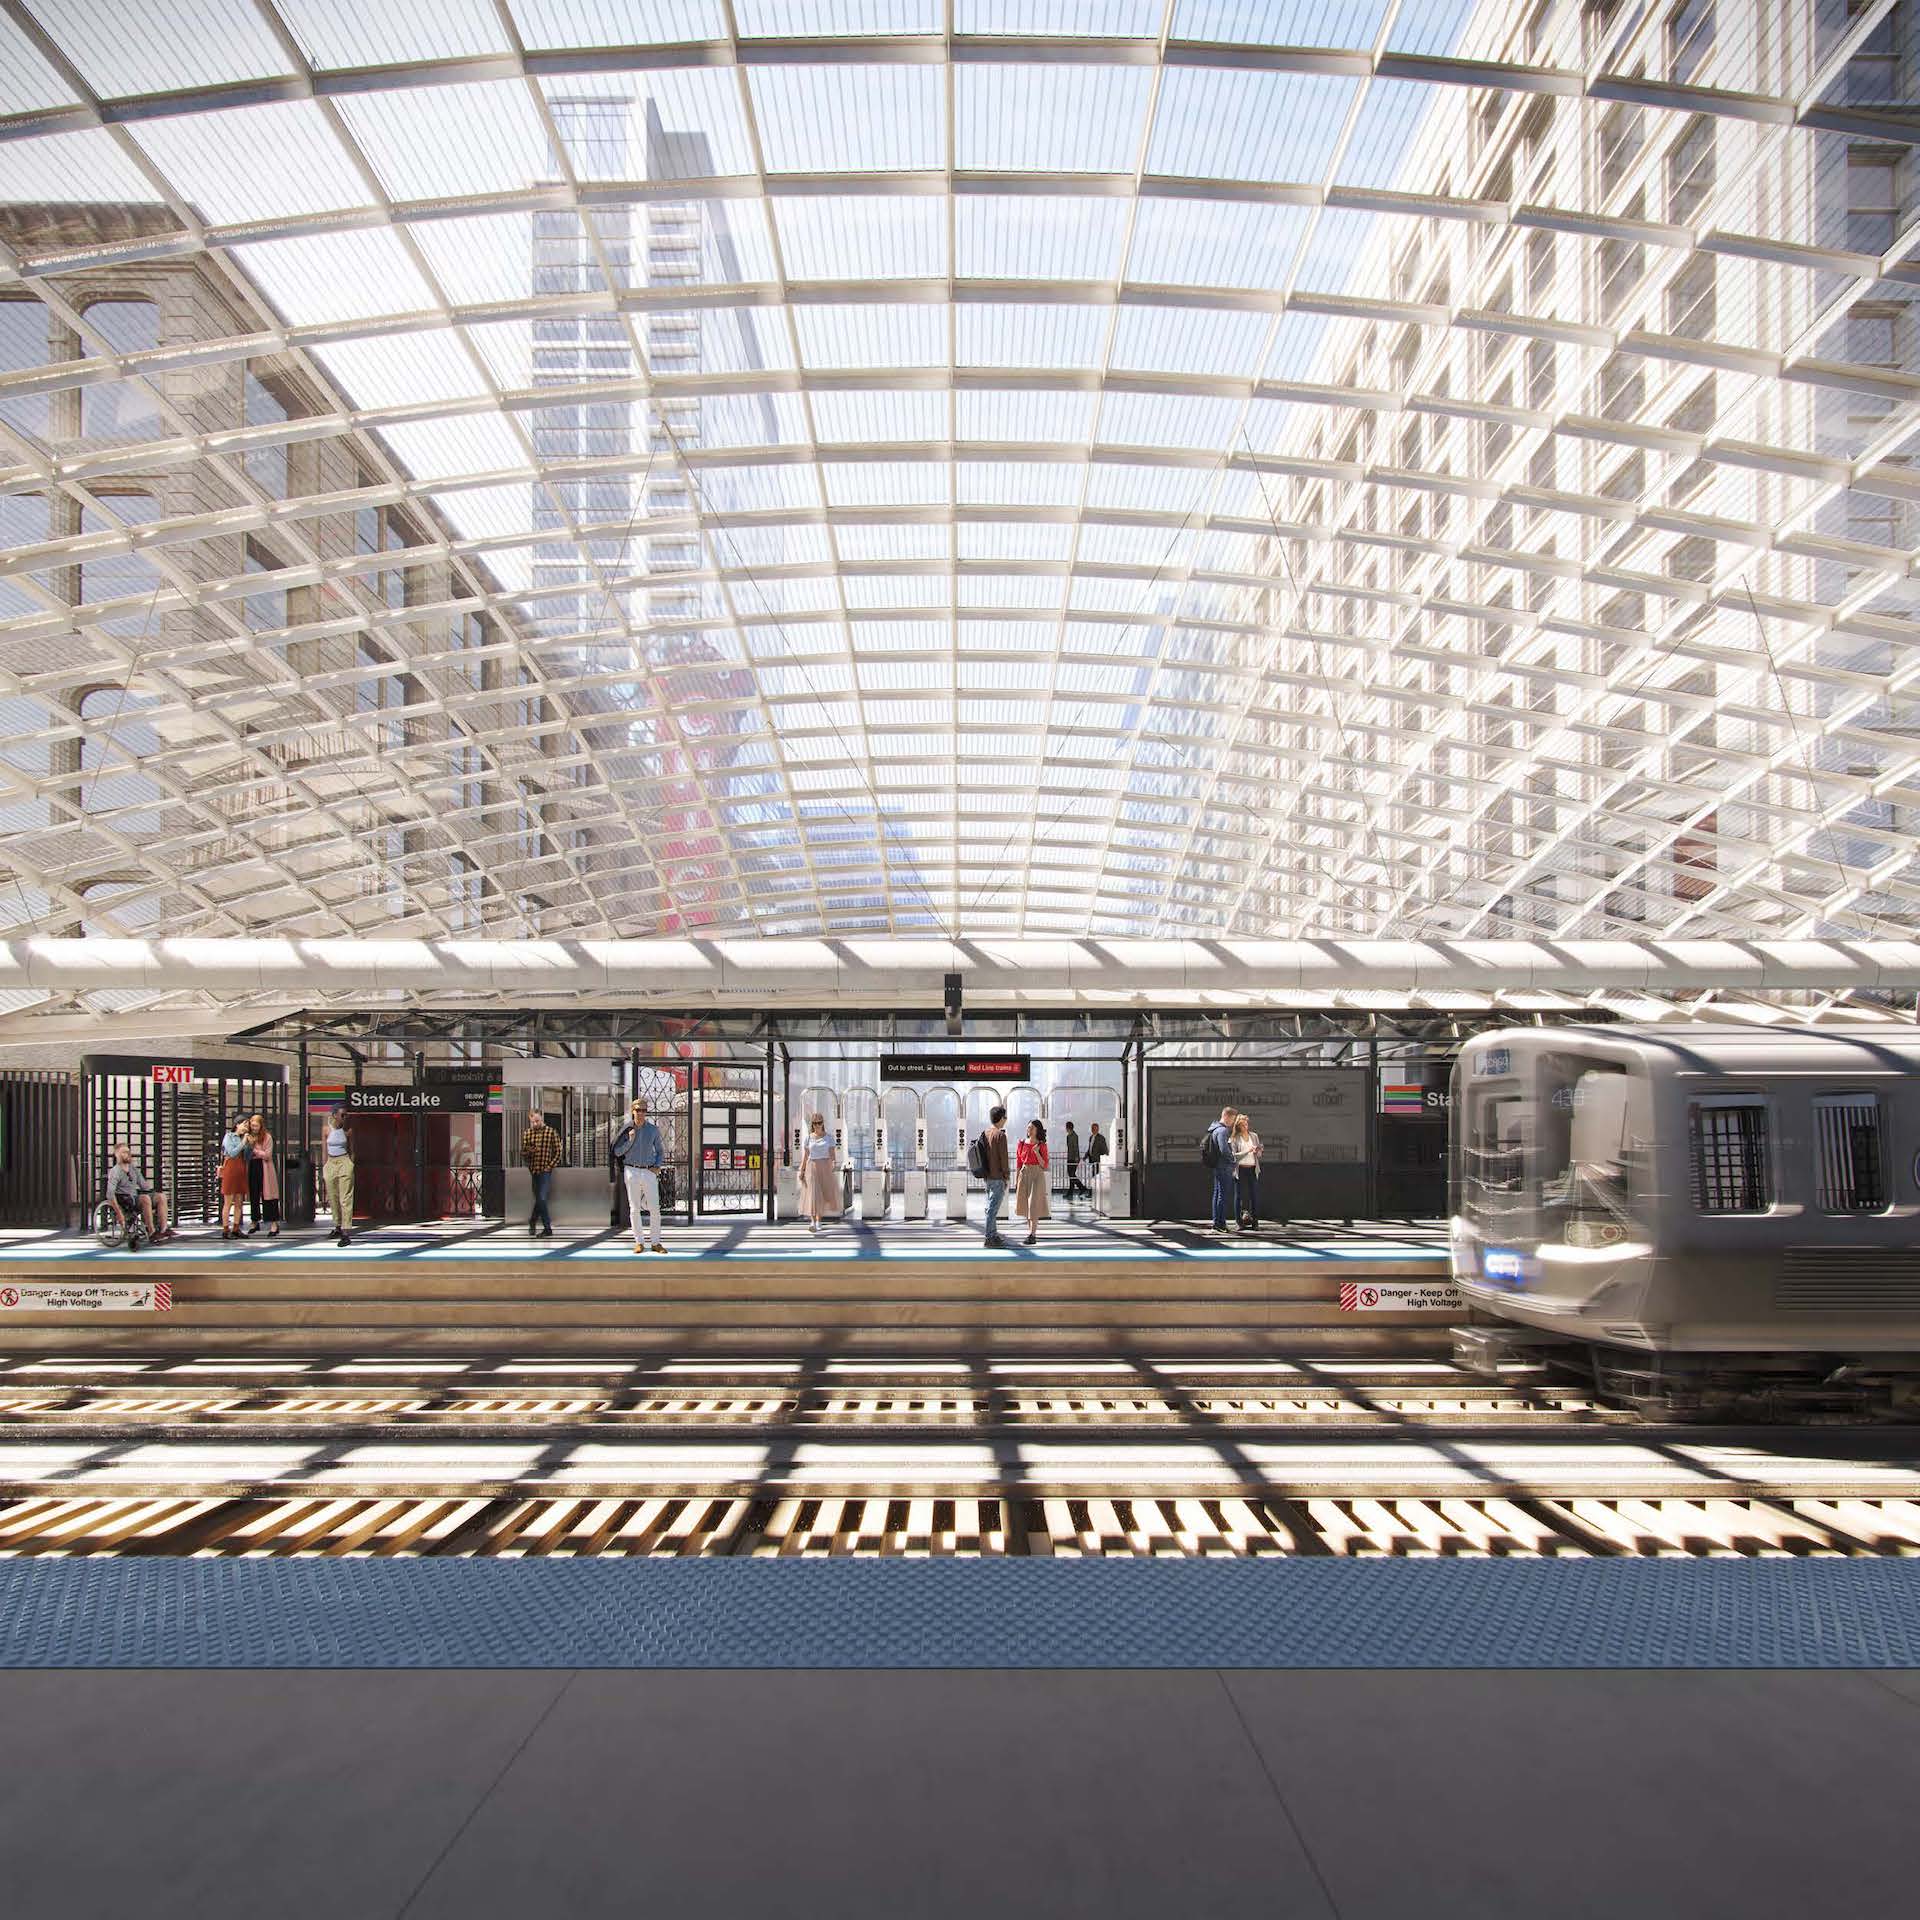 illustrated view of an elevated subway station and glass canopy from the platform level